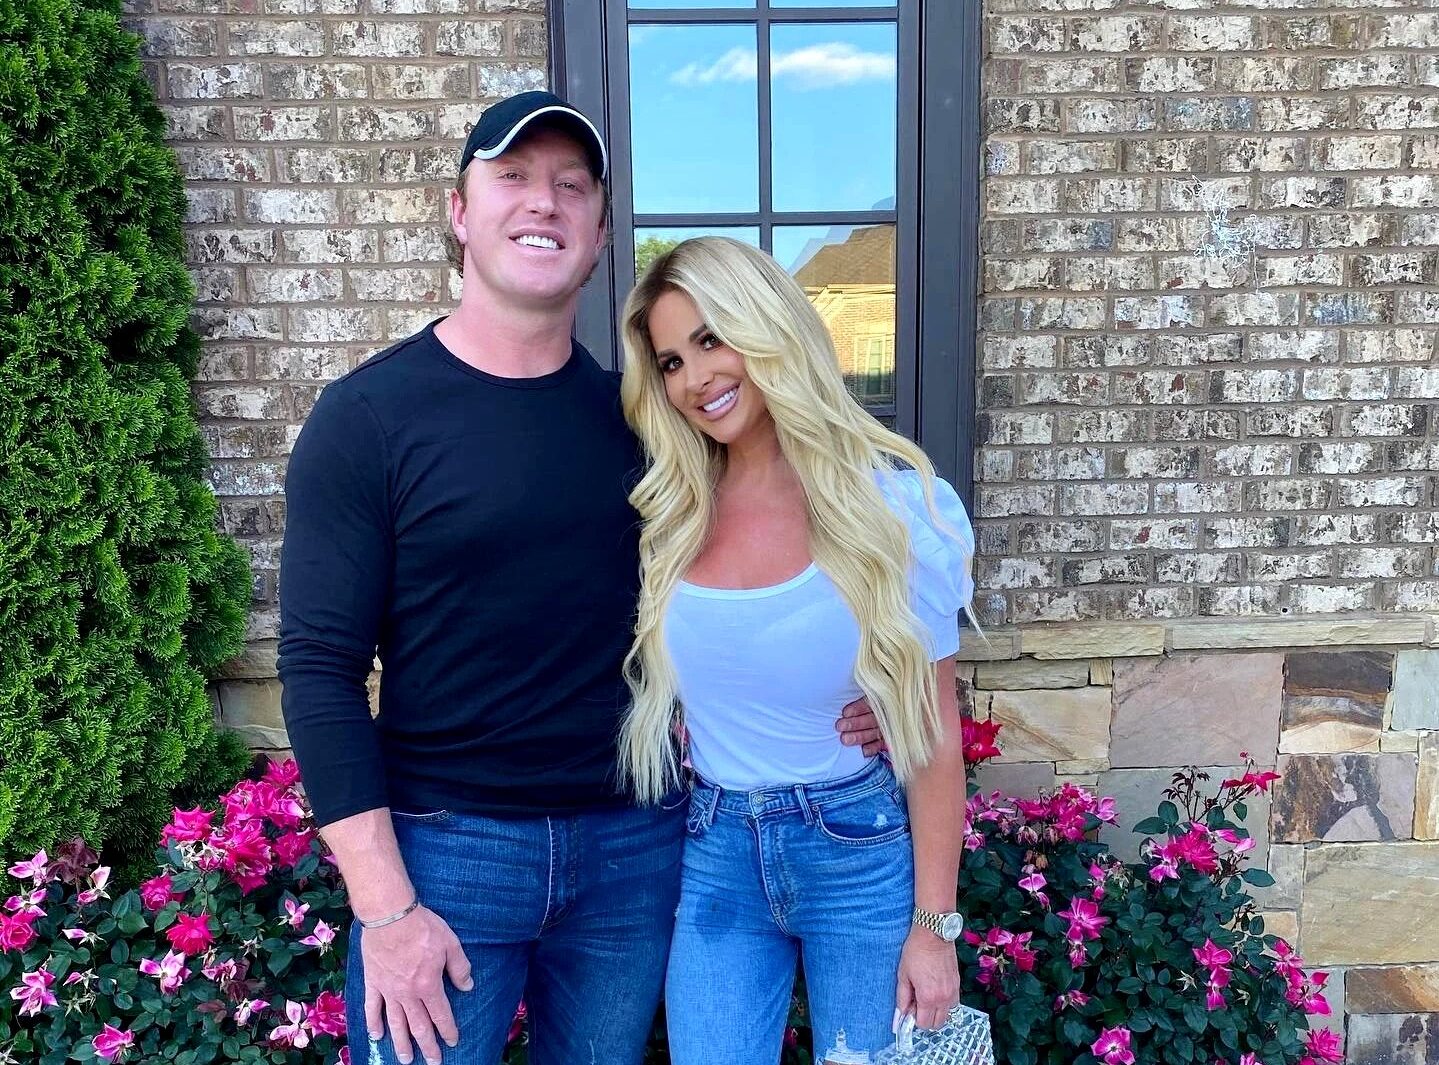 PHOTOS: Kim Zolciak and Kroy Biermann Celebrate 12th Anniversary With Dinner Amid Messy Divorce, Plus Kroy Faces Seizure of Rolls Royce After Kim Spends Up to $30K on Vaginal Rejuvenation